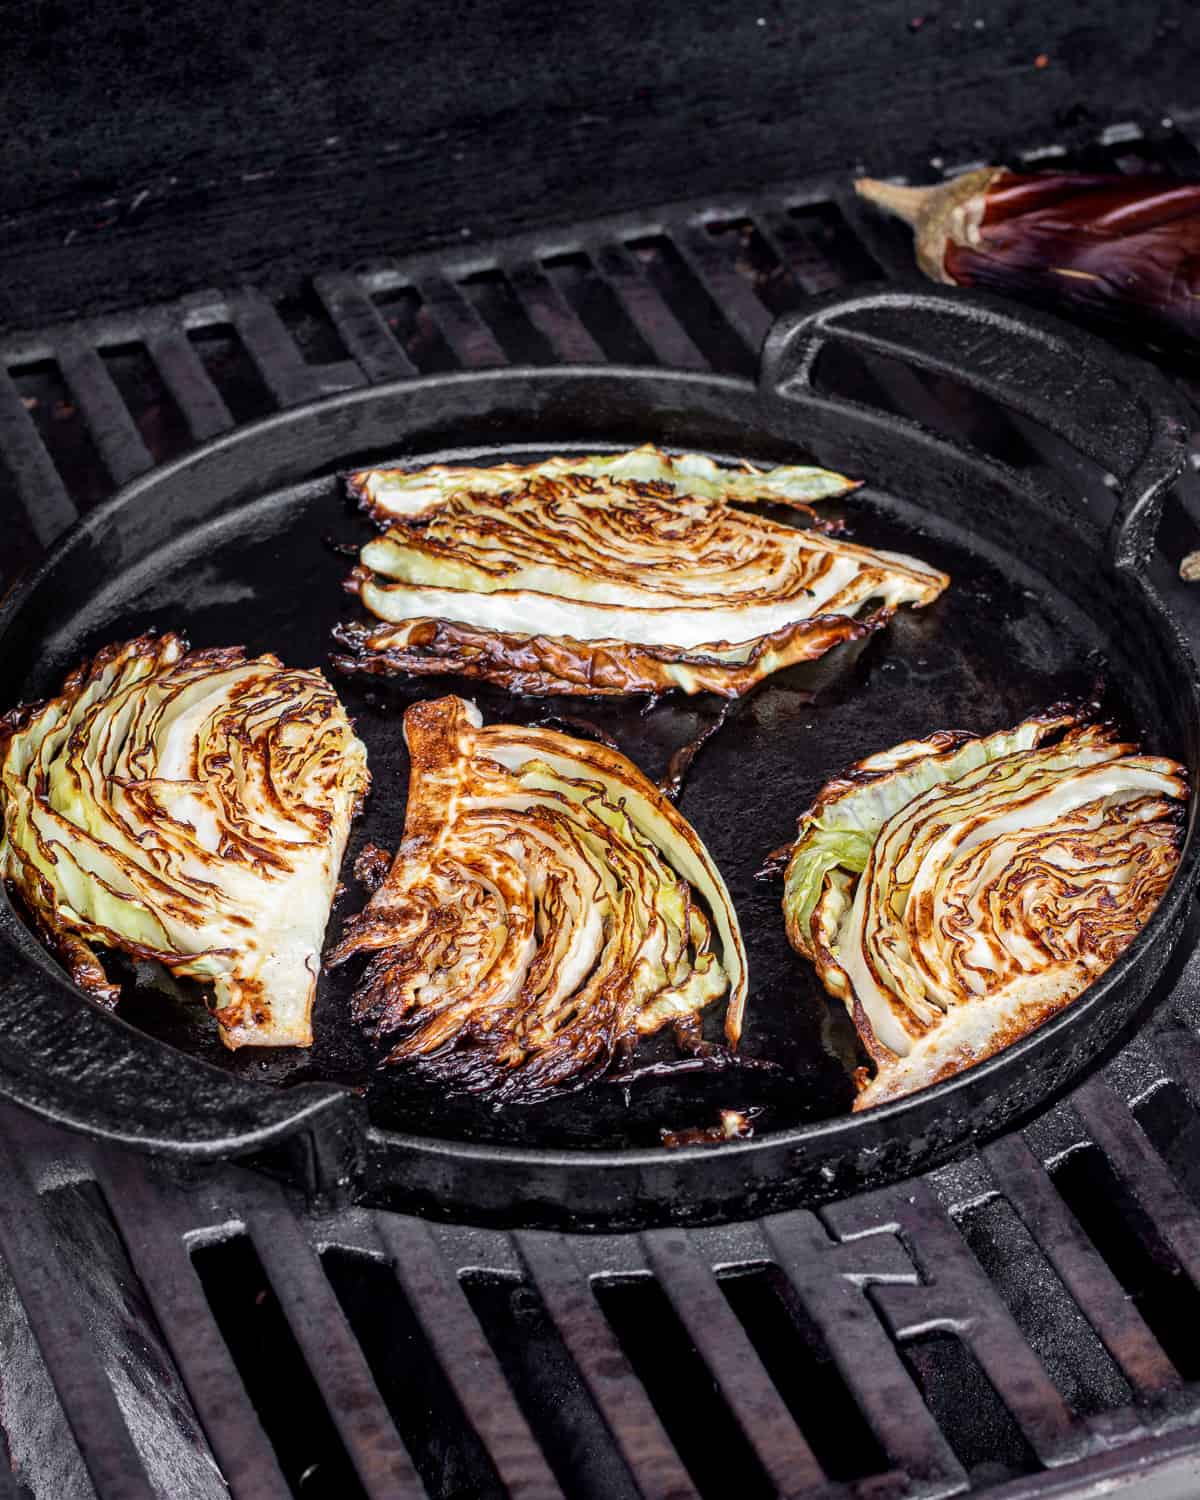 Charred cabbage wedges on the griddle of a gas grill.